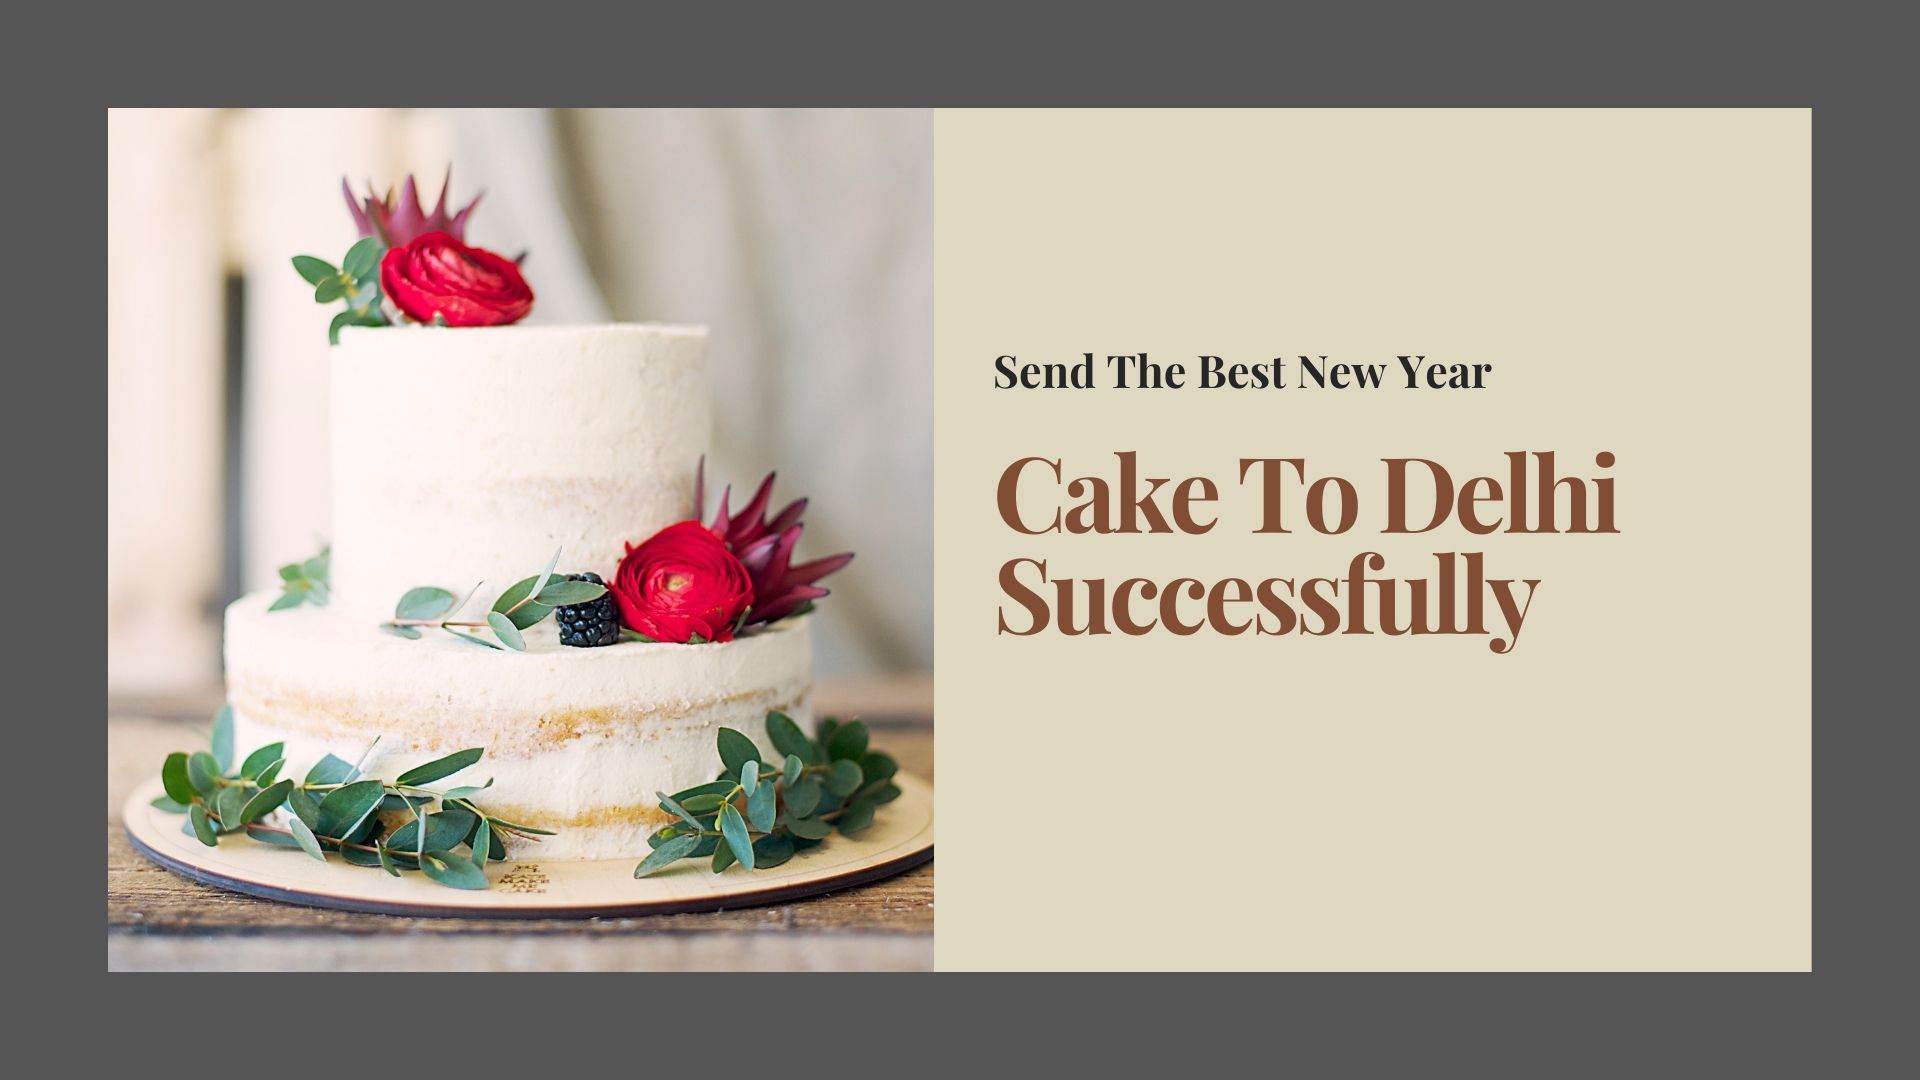 Send The Best New Year Cake To Delhi Successfully